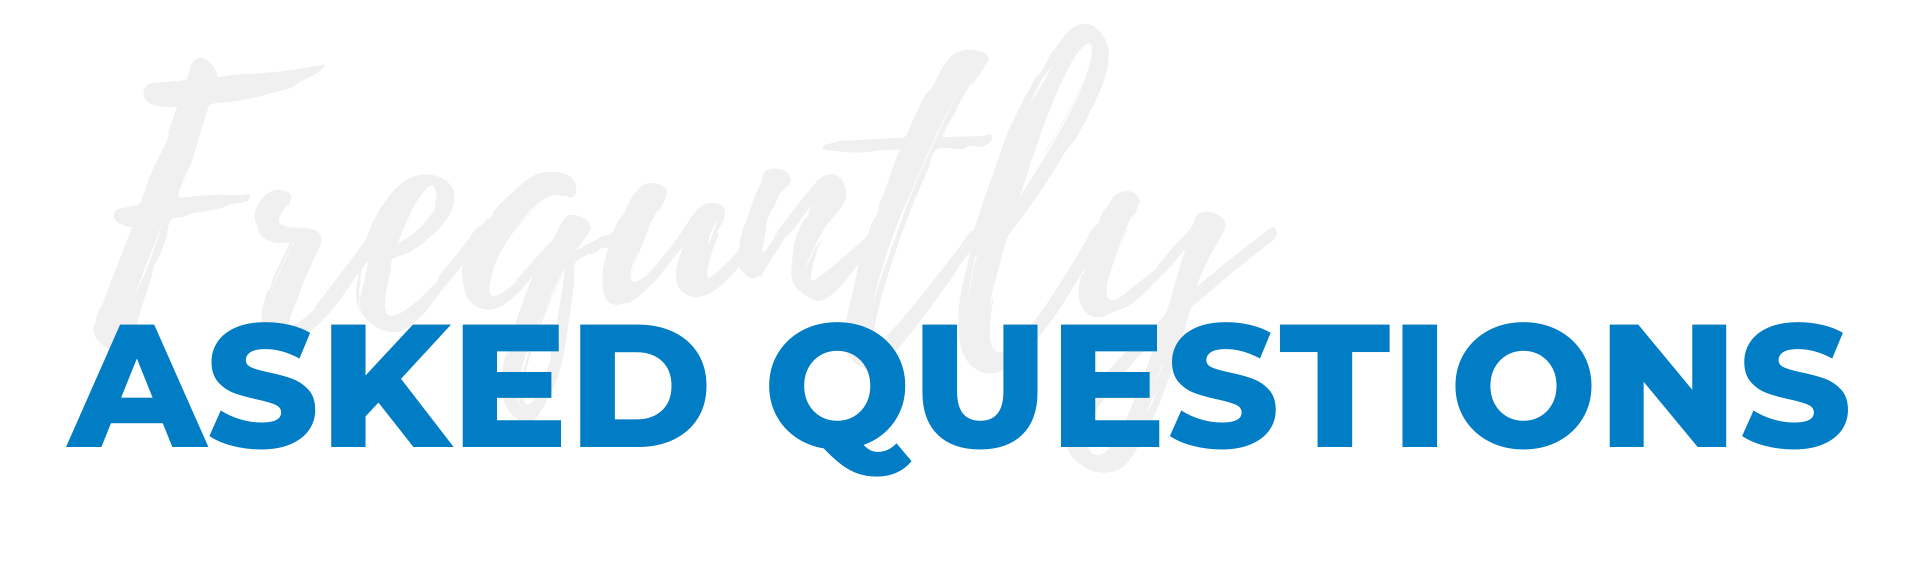 A blue and white logo that says `` frequently asked questions '' on a white background.